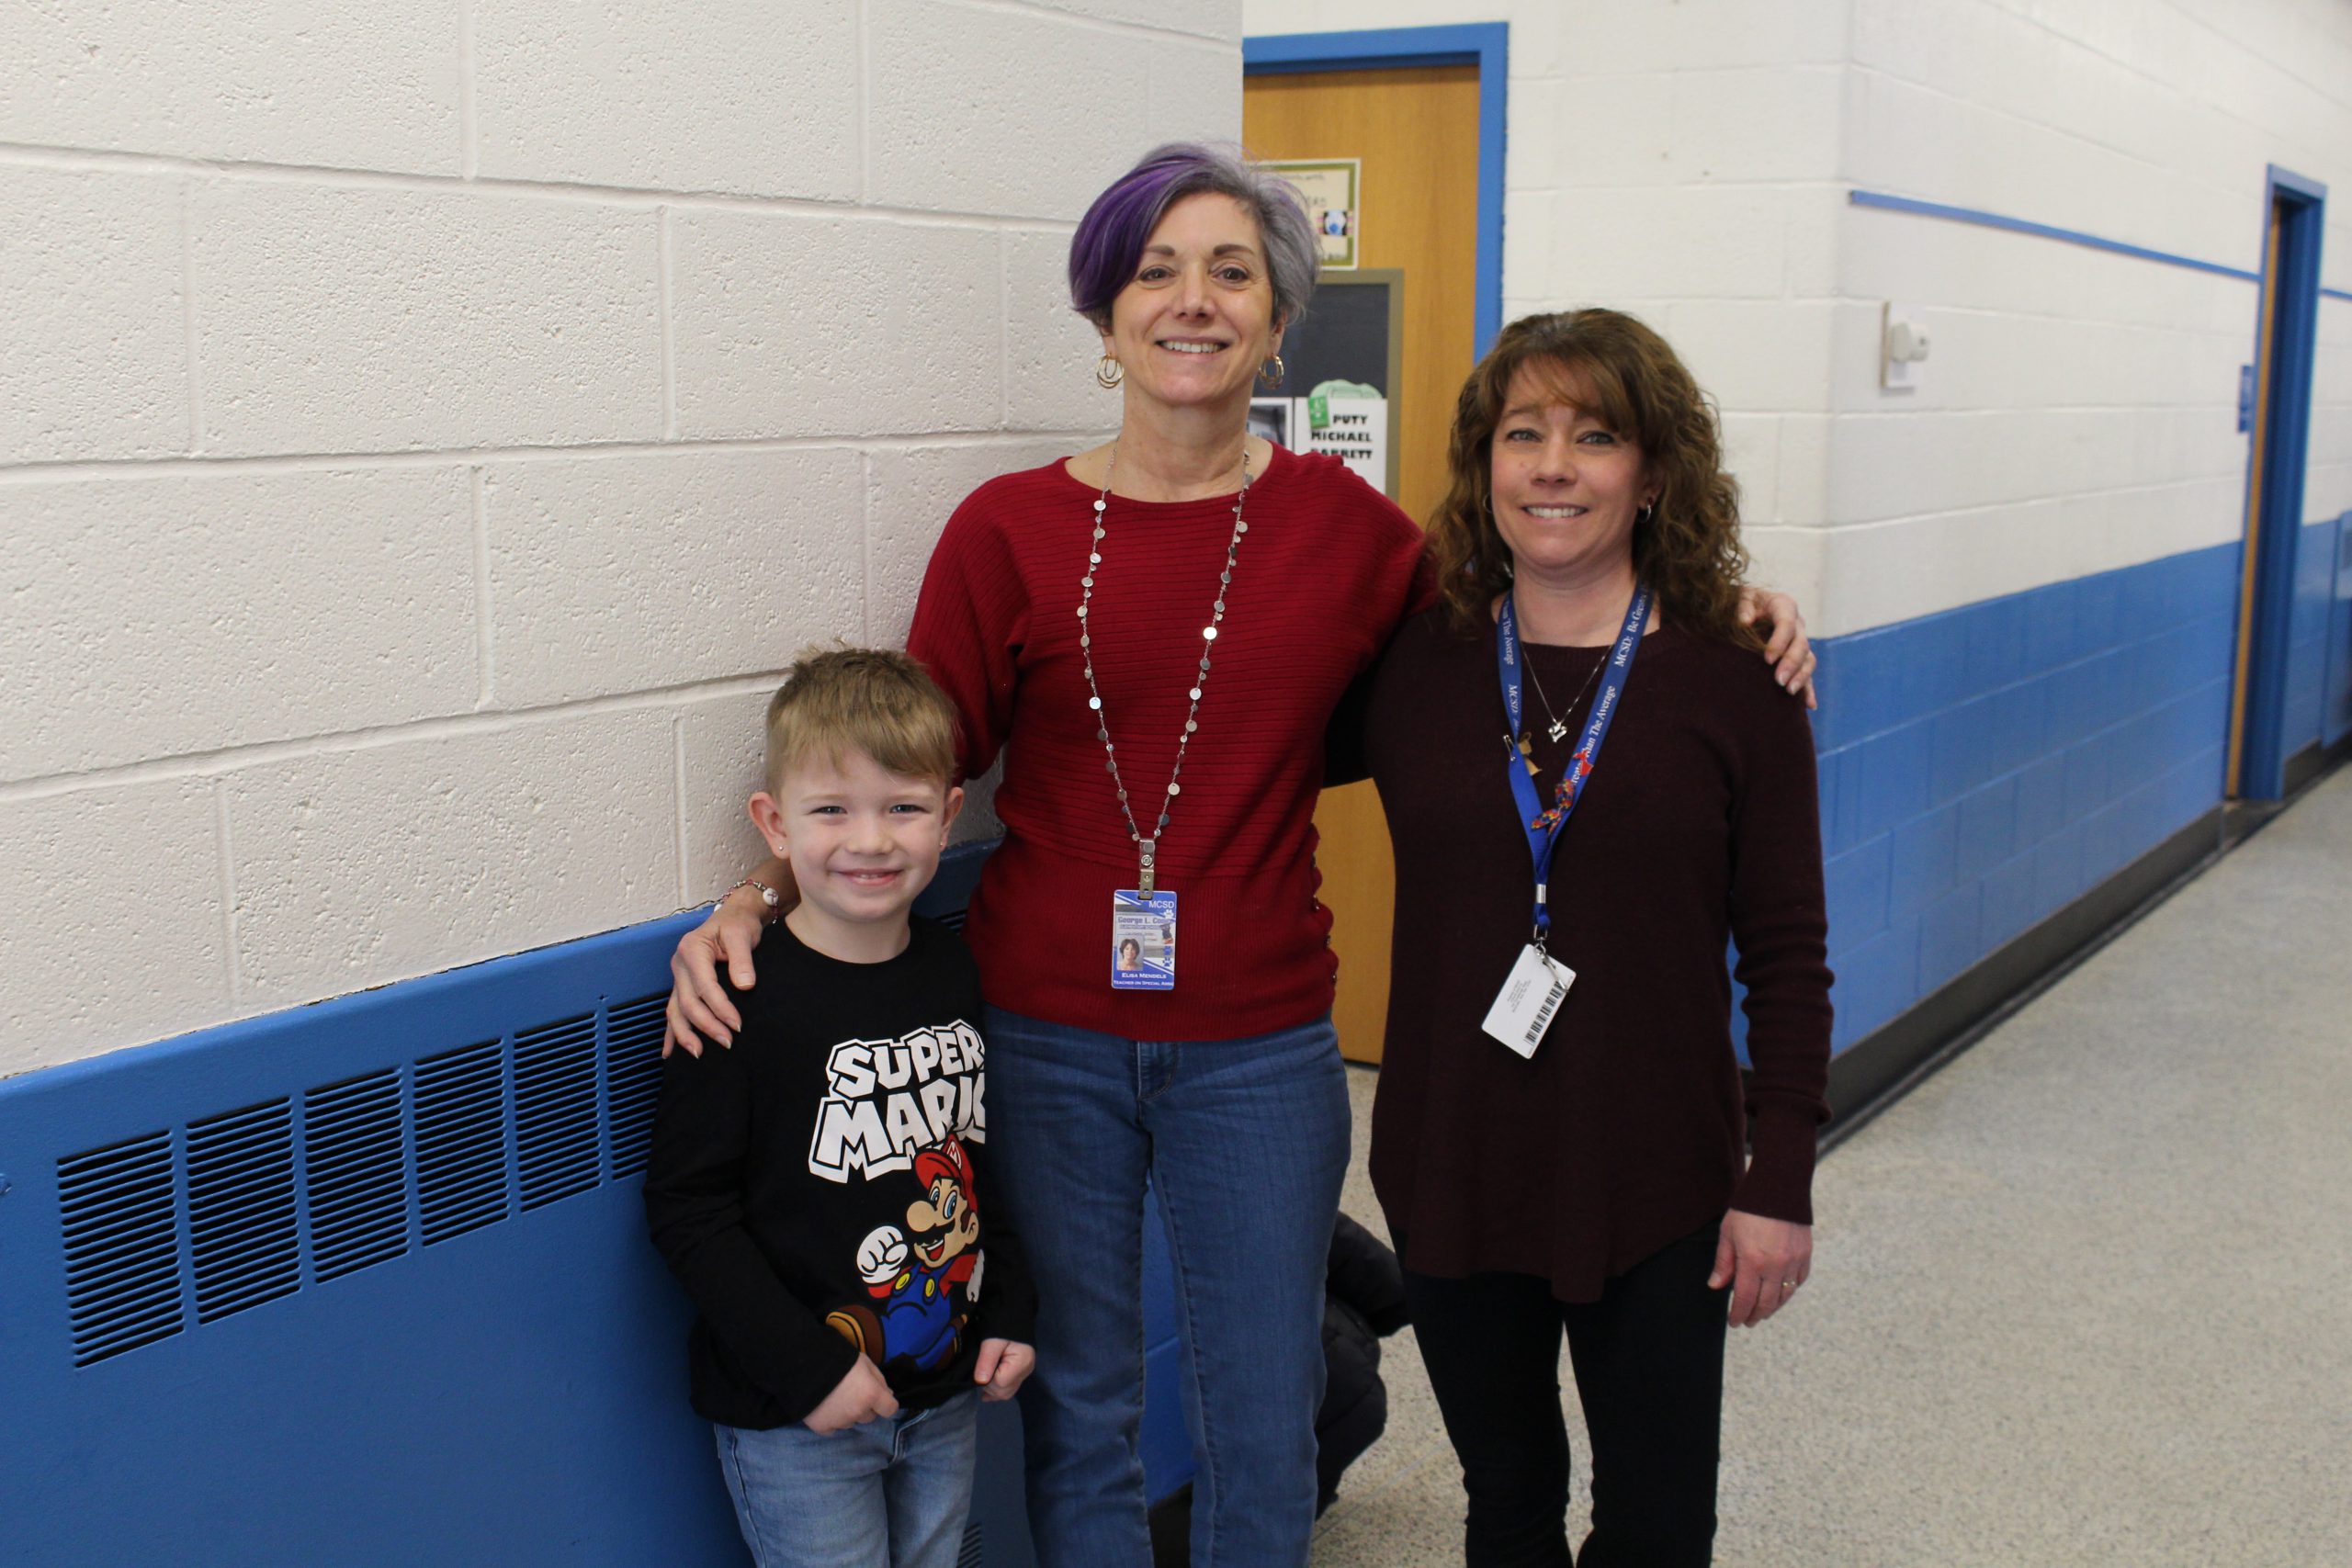 two women are smiling in a hallway and posing with a student